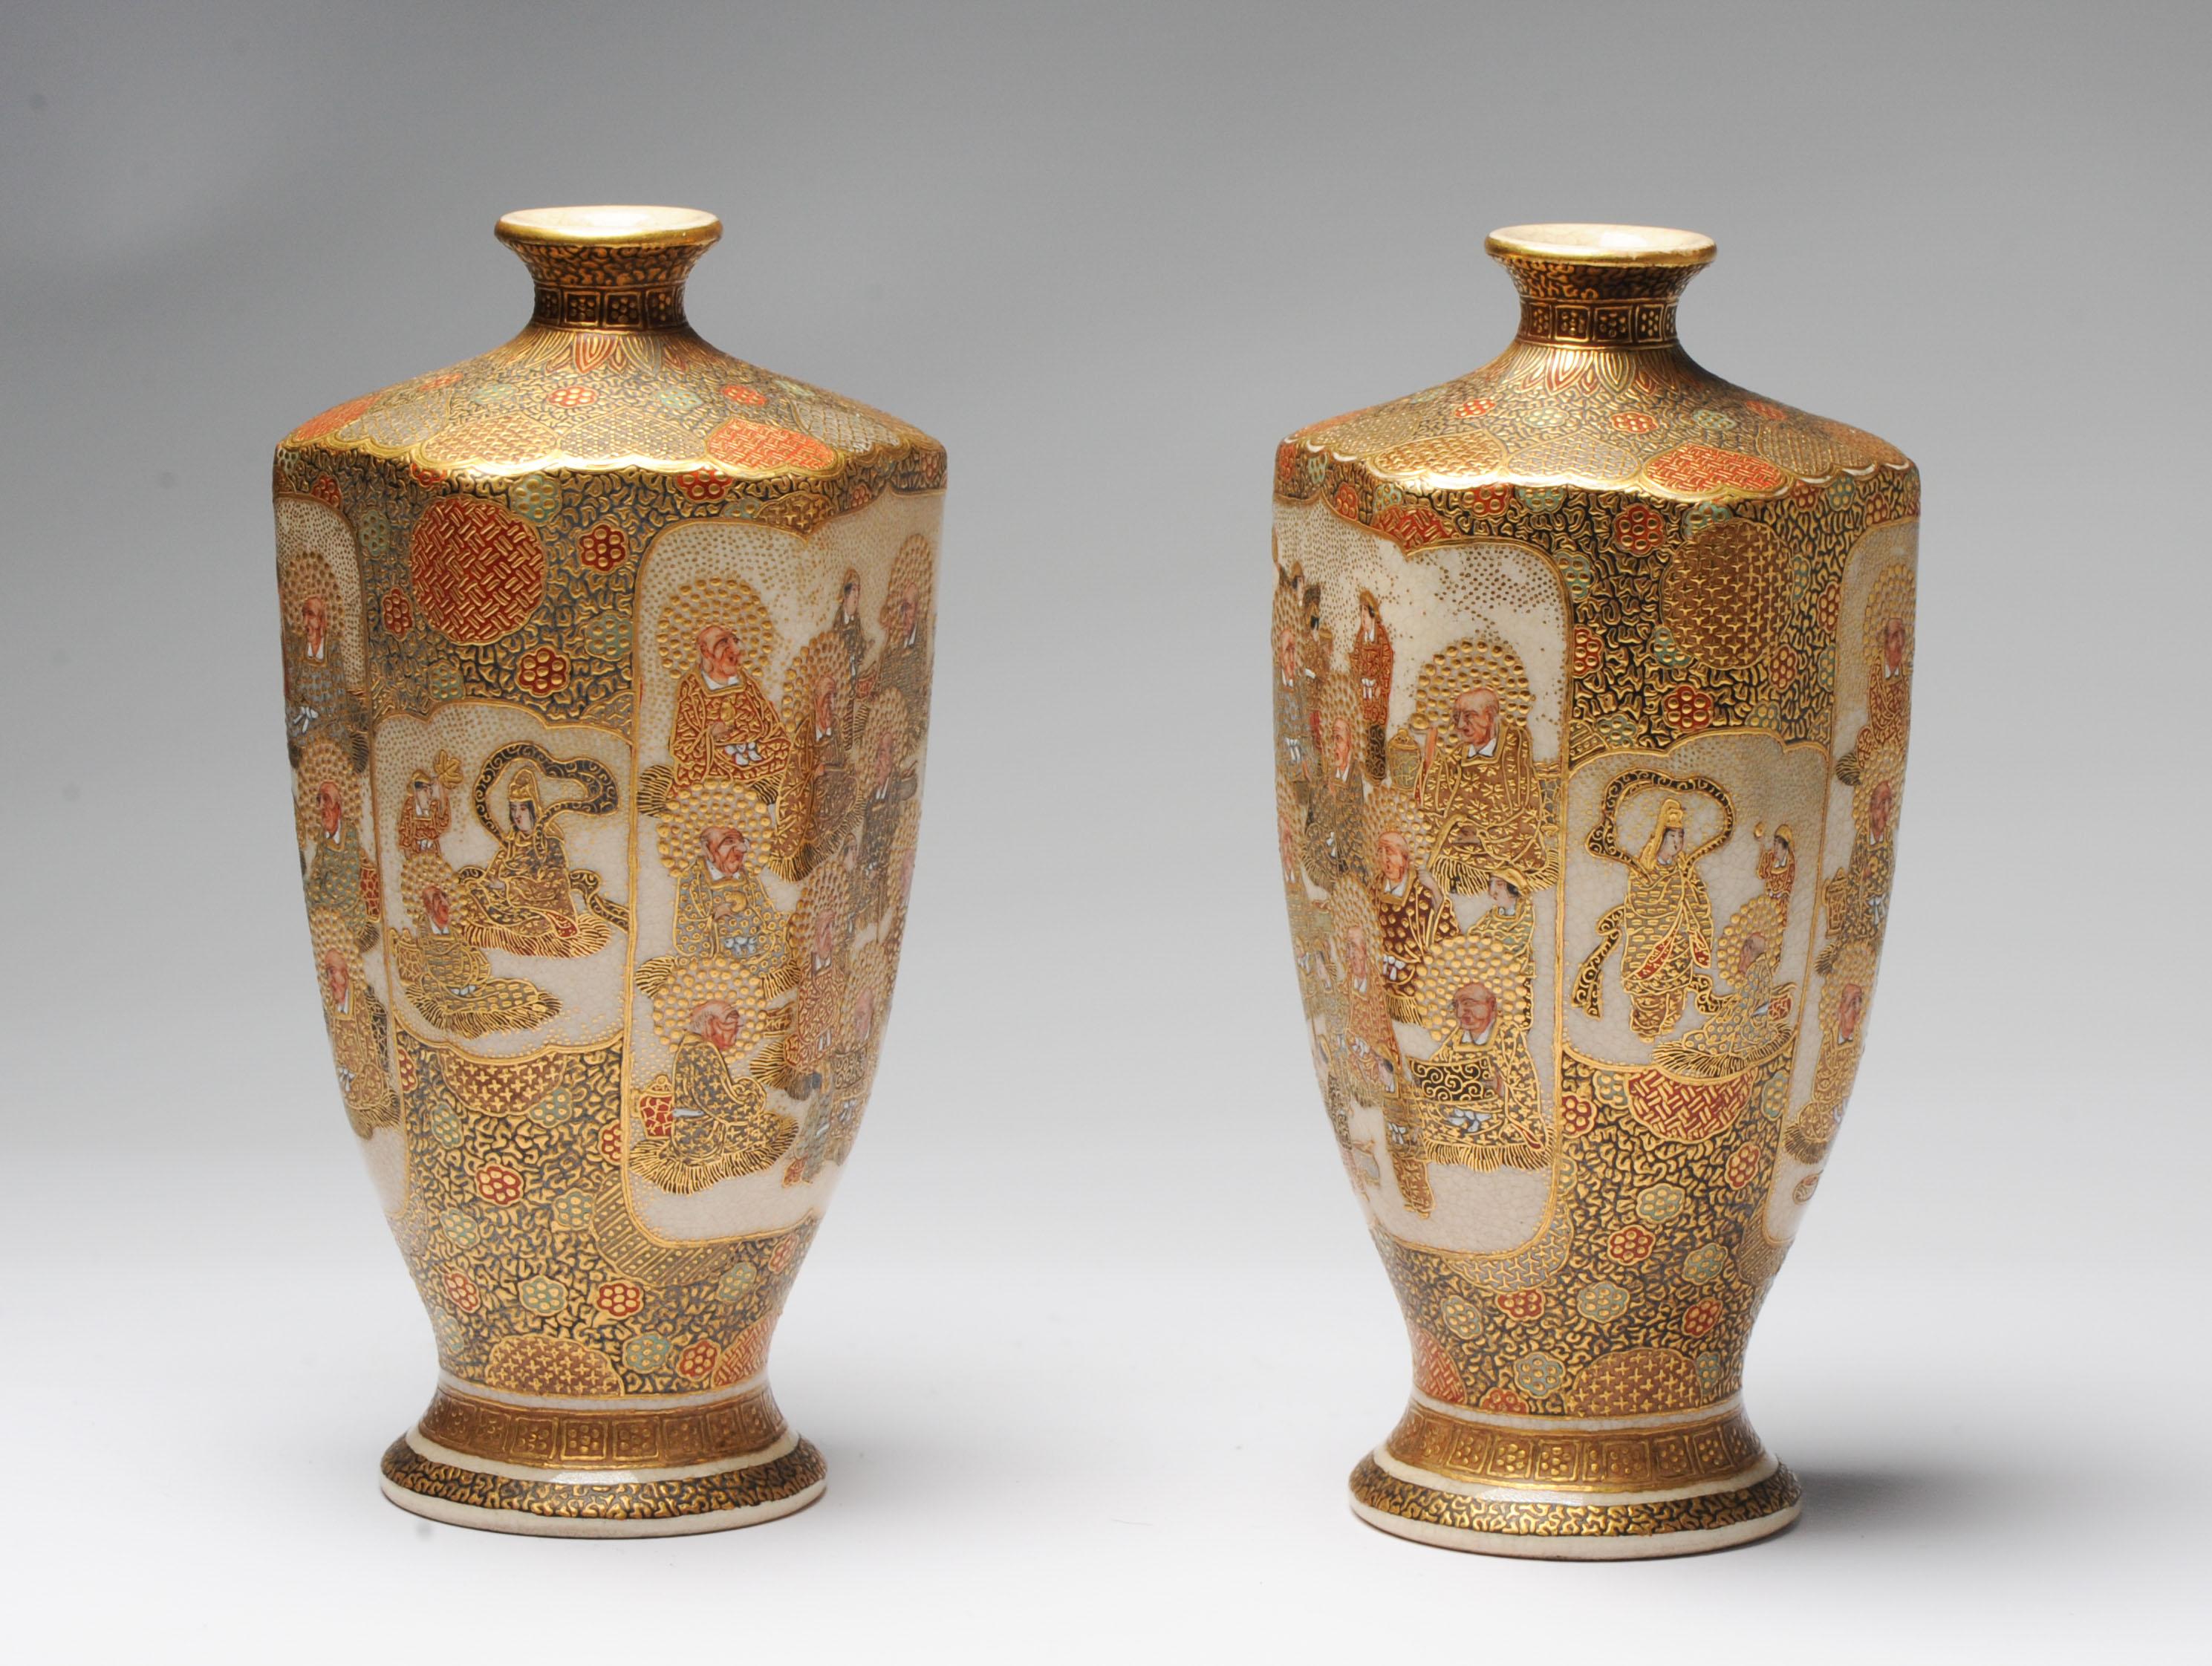 A Pair of Japanese Satsuma vases, Meiji Period. Incredible and very detailed piece. Just superb

Marked: Nihon-toki (Japanese pottery),Satsuma-Yaki (Satsuma ware),(Painted by Hozan).

Additional information:
Material: Porcelain & Pottery
Region of